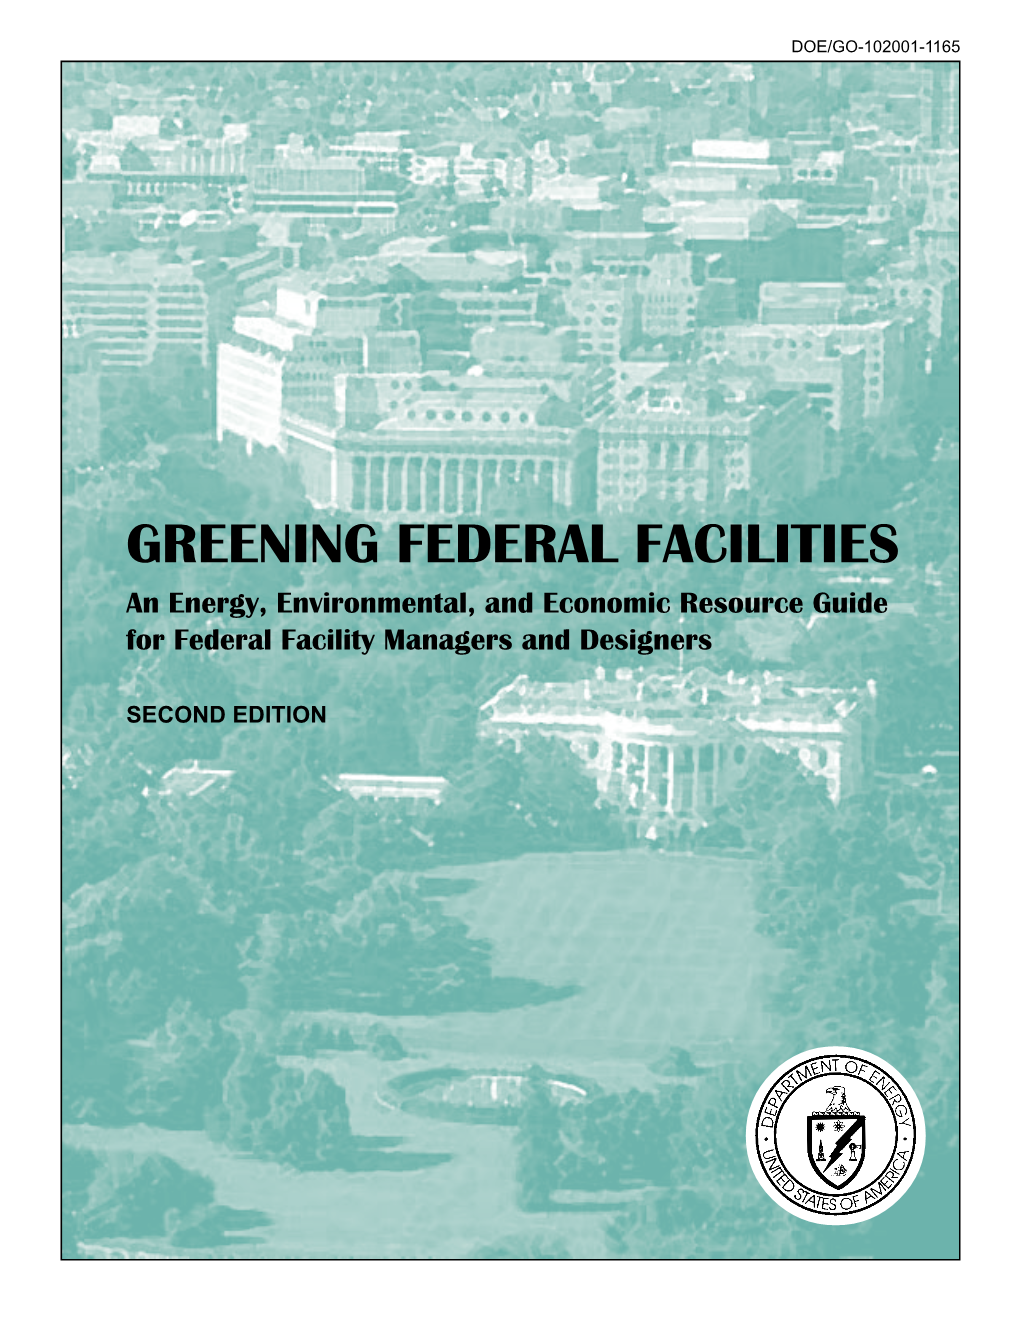 GREENING FEDERAL FACILITIES an Energy, Environmental, and Economic Resource Guide for Federal Facility Managers and Designers